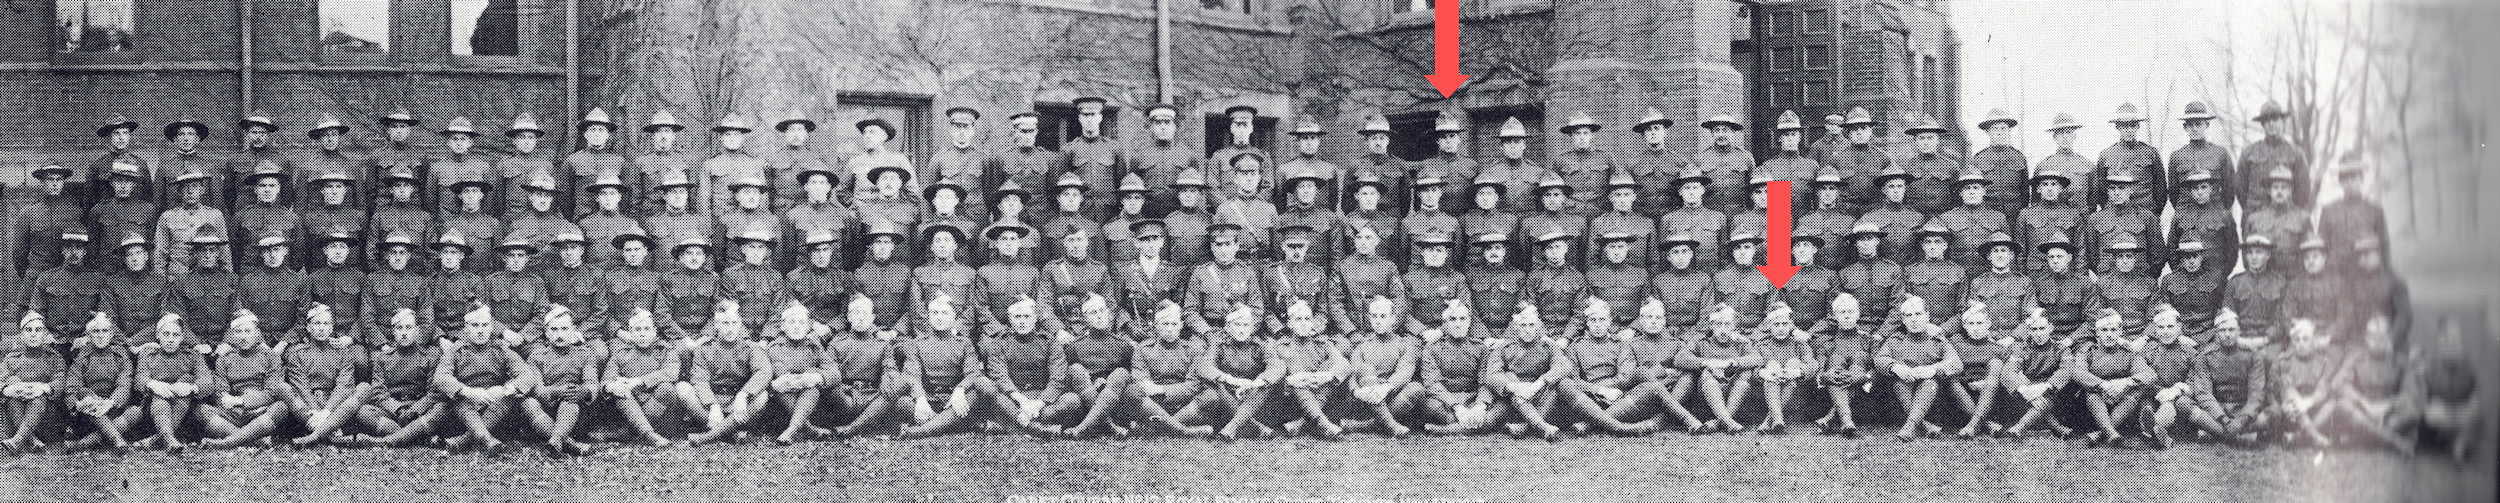 Graduates of Cadet Course No. 17 in Toronto, November, 1917. Ted Parsons stands in the back row, Bill Frayne sits in the front row. Image courtesy Clark, Don. (1972). Wild Blue Yonder: An Air Epic. Superior Publishing Company, Seattle, Wash.